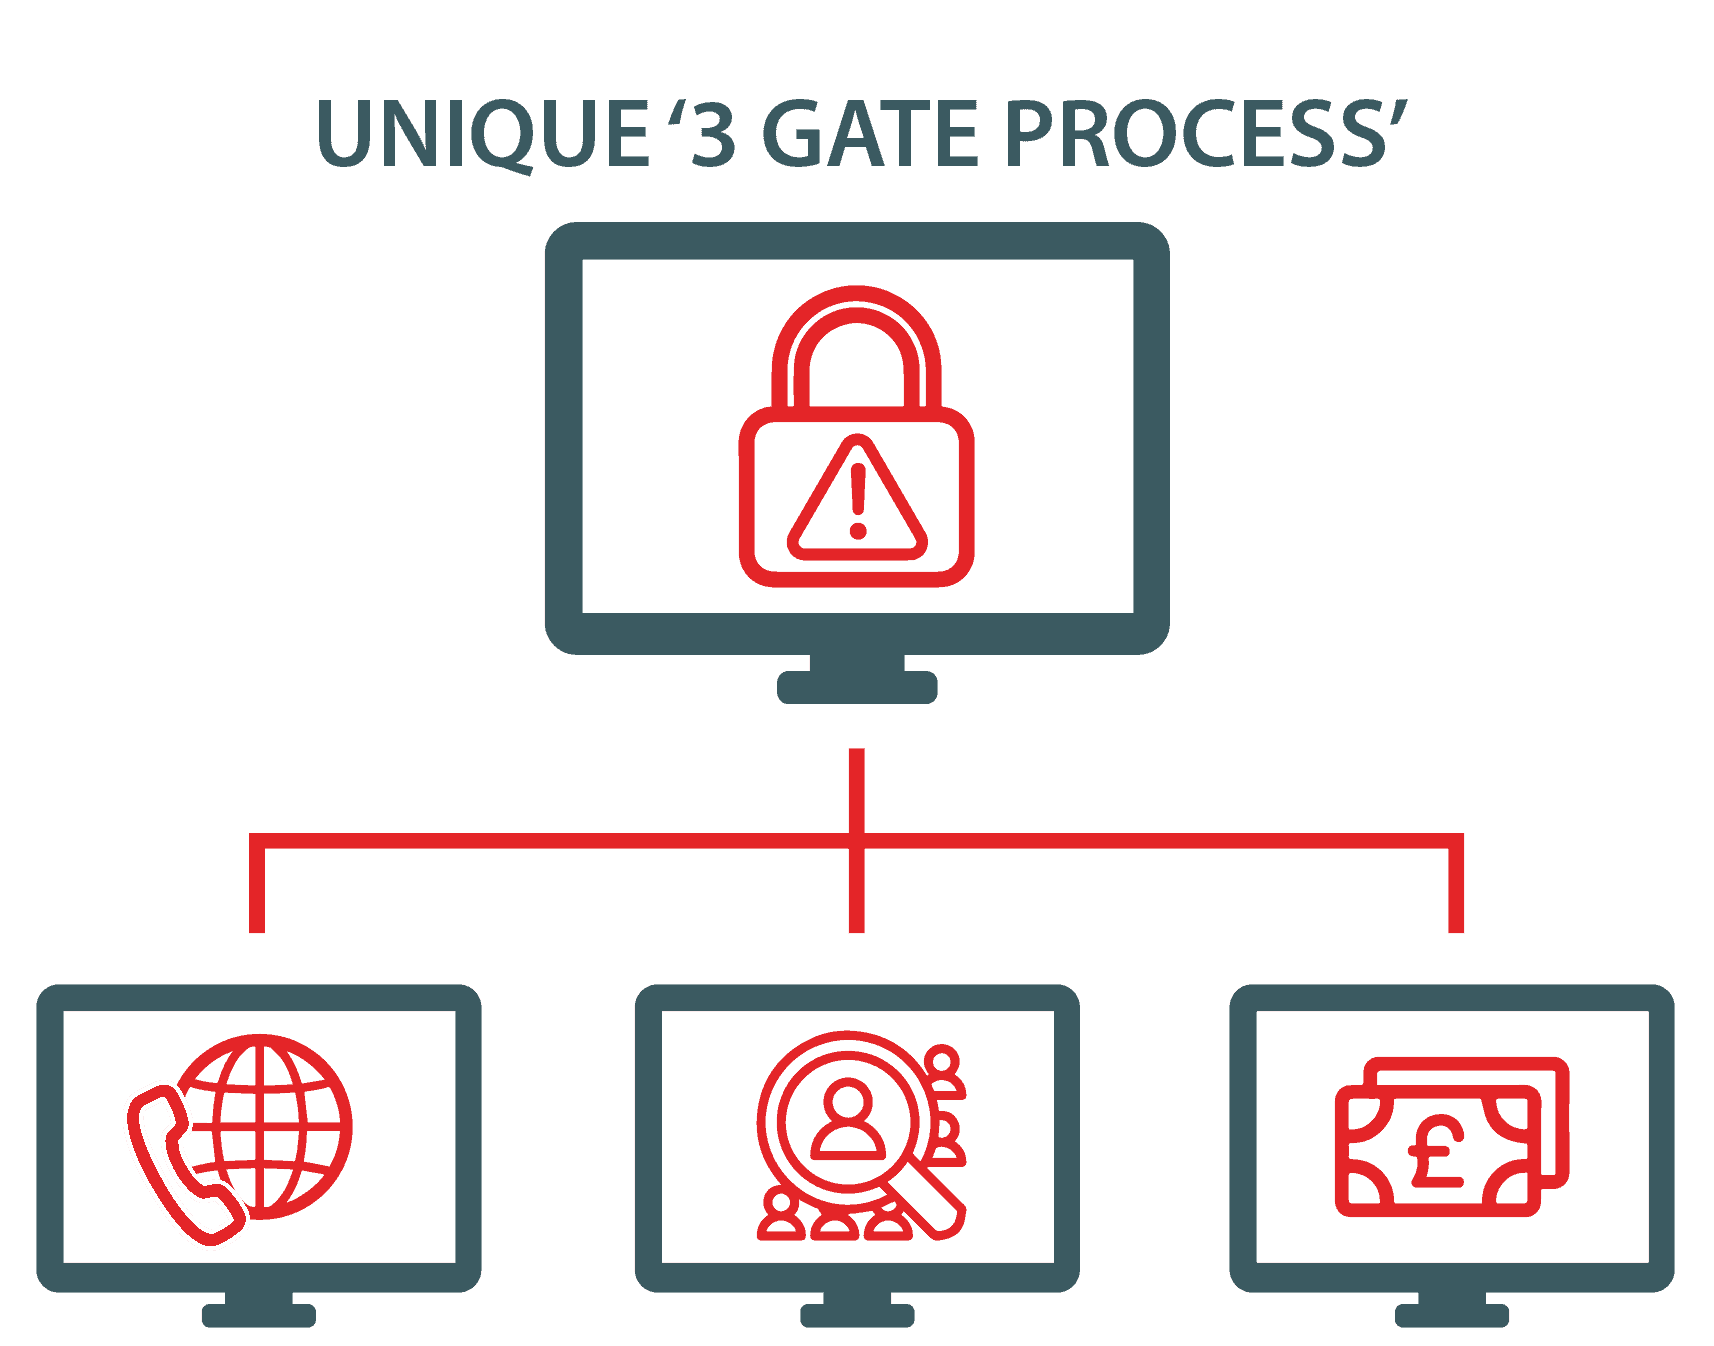 Tollring Fraud Protect Unique 3 Gate Process